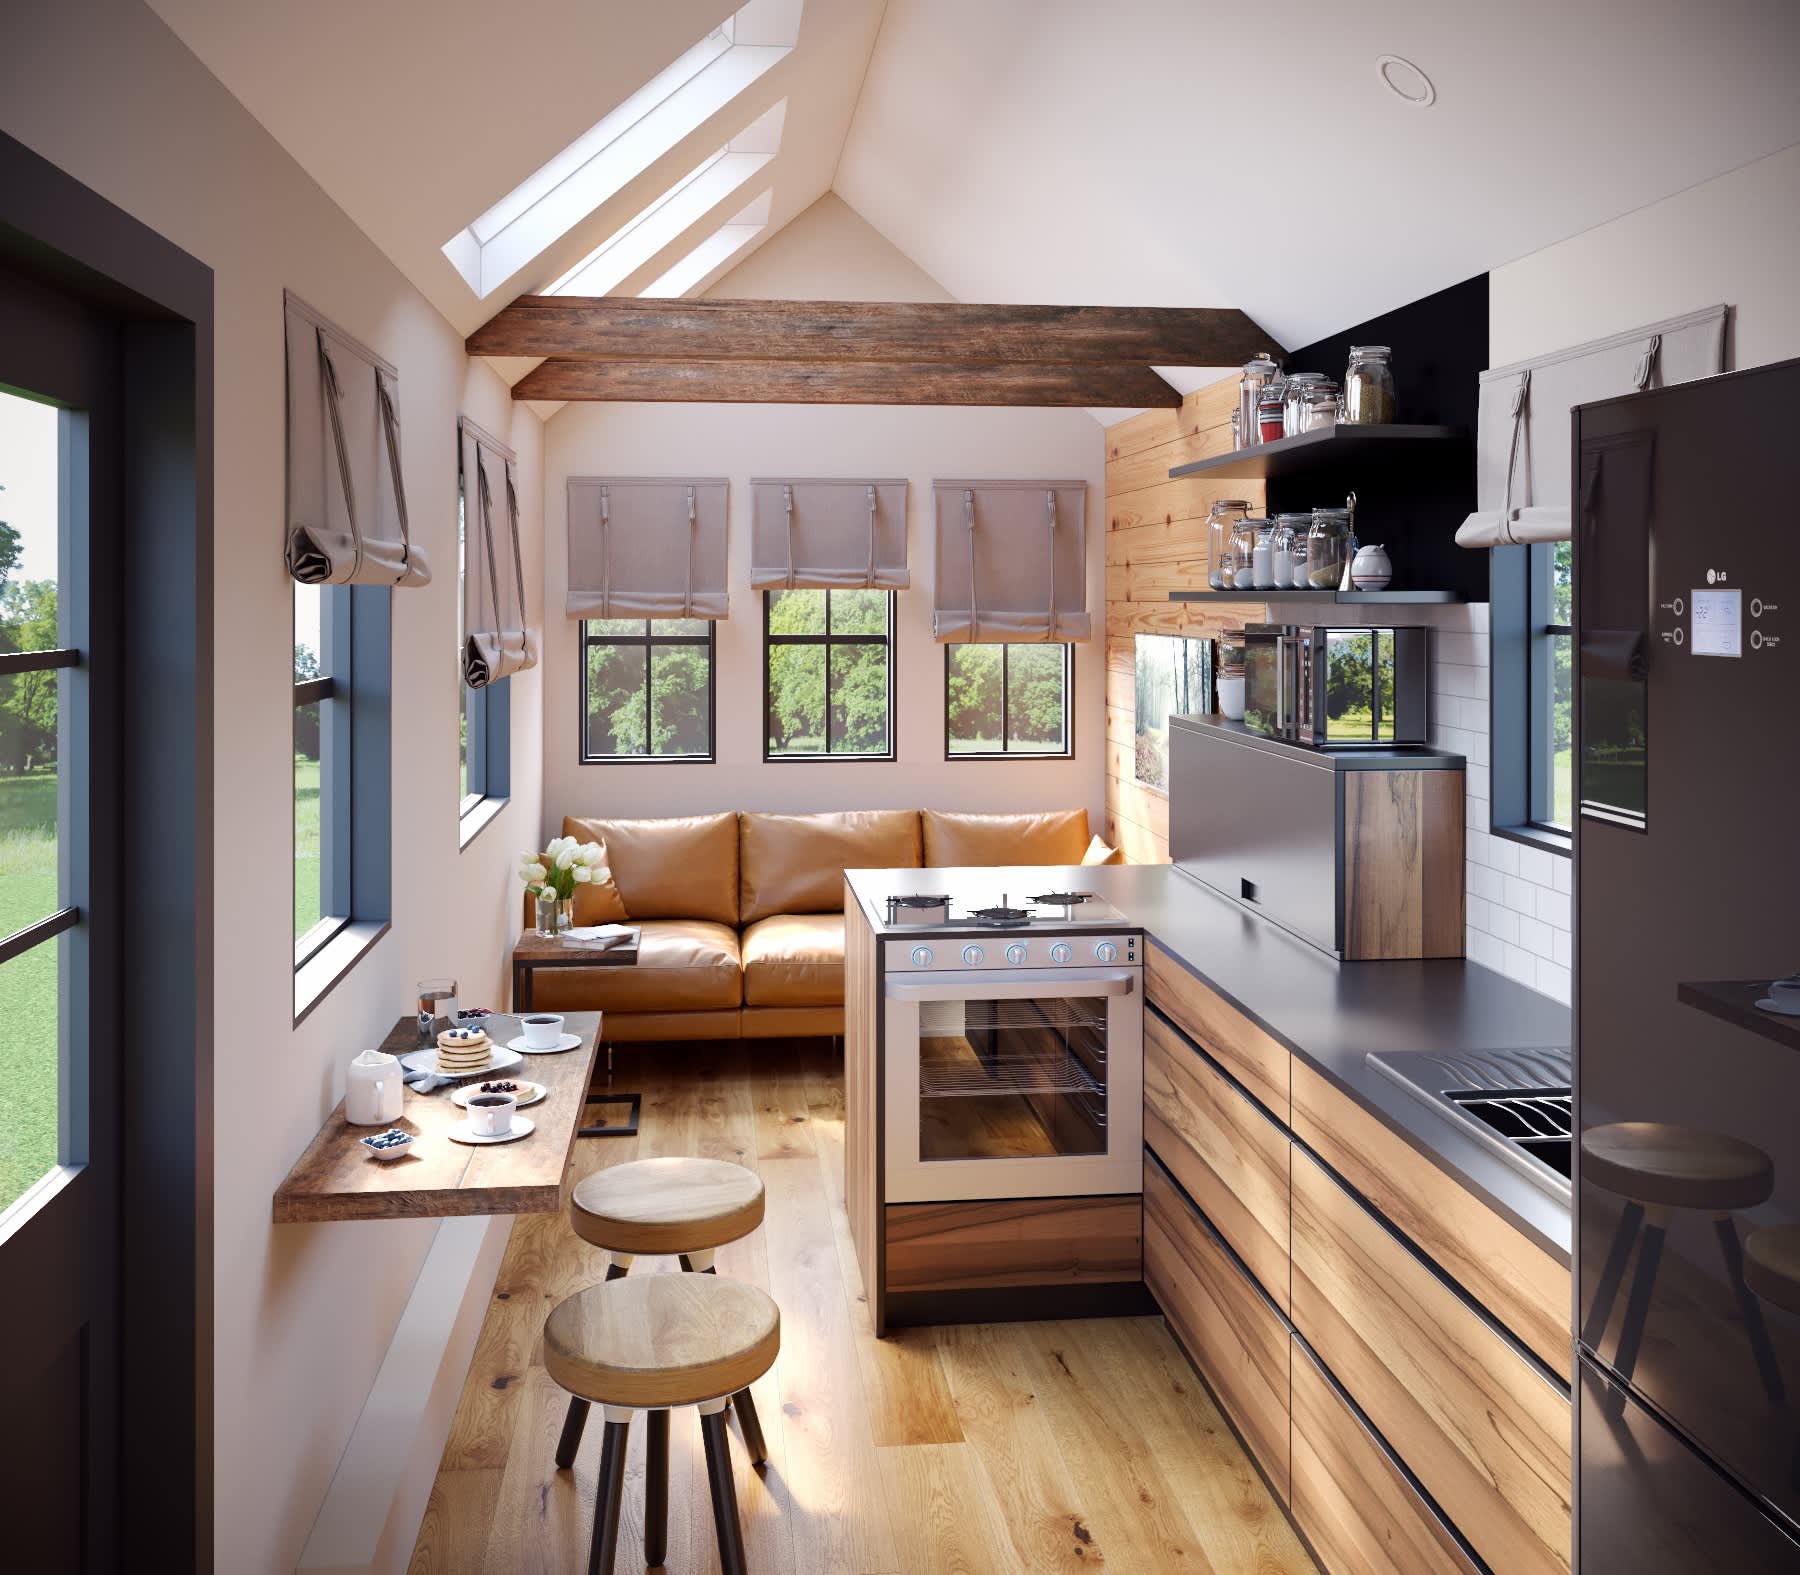 Fancy, Expensive Tiny Home From Allswell Costs $100,000